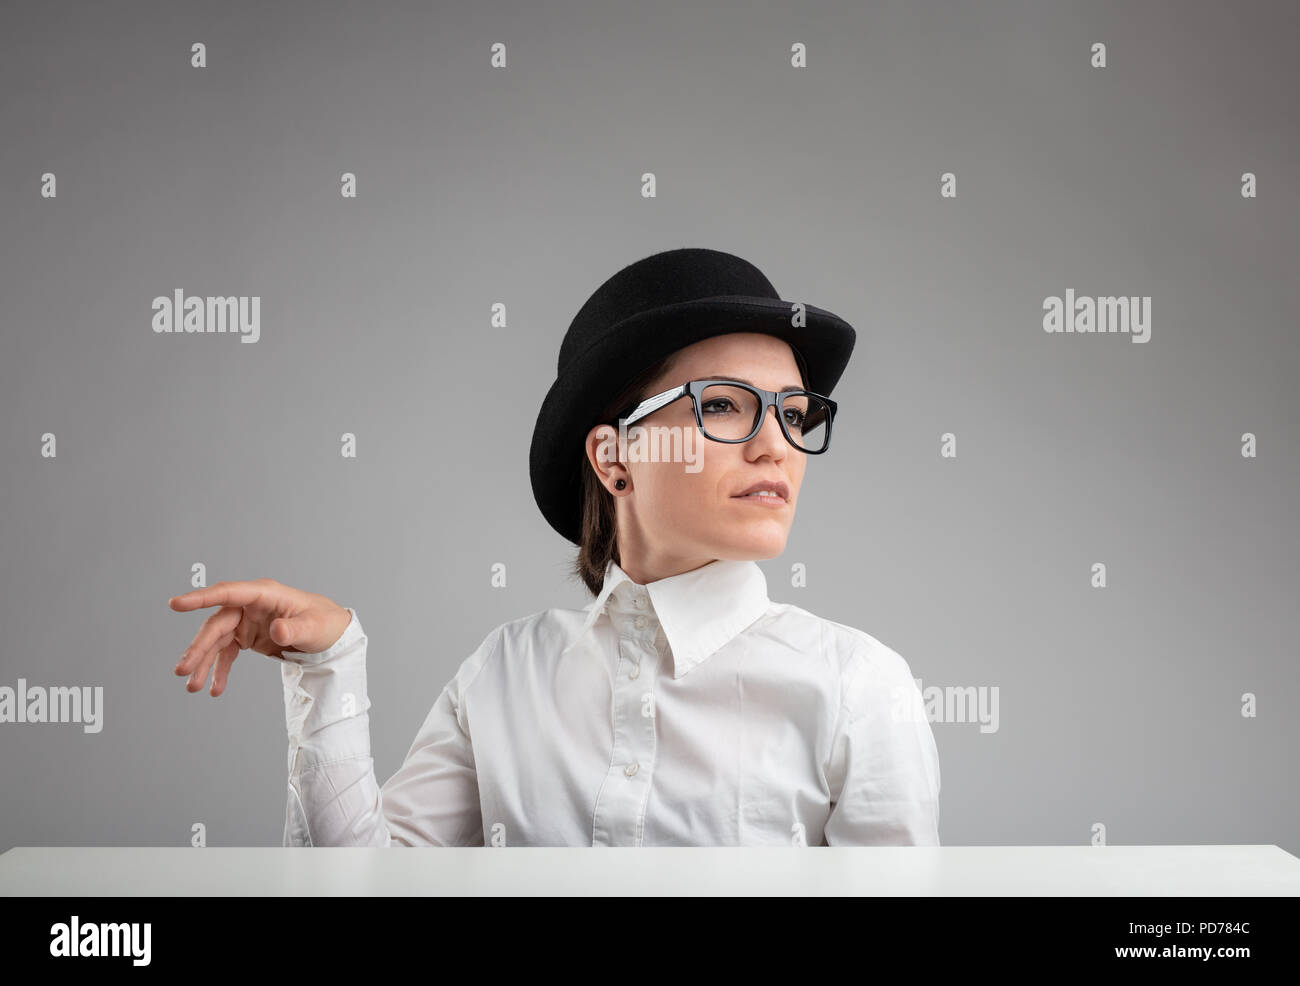 Elegant diva in a vintage bowler hat and glasses gesturing with her hand and looking off to the side with a superior proud expression against a grey b Stock Photo